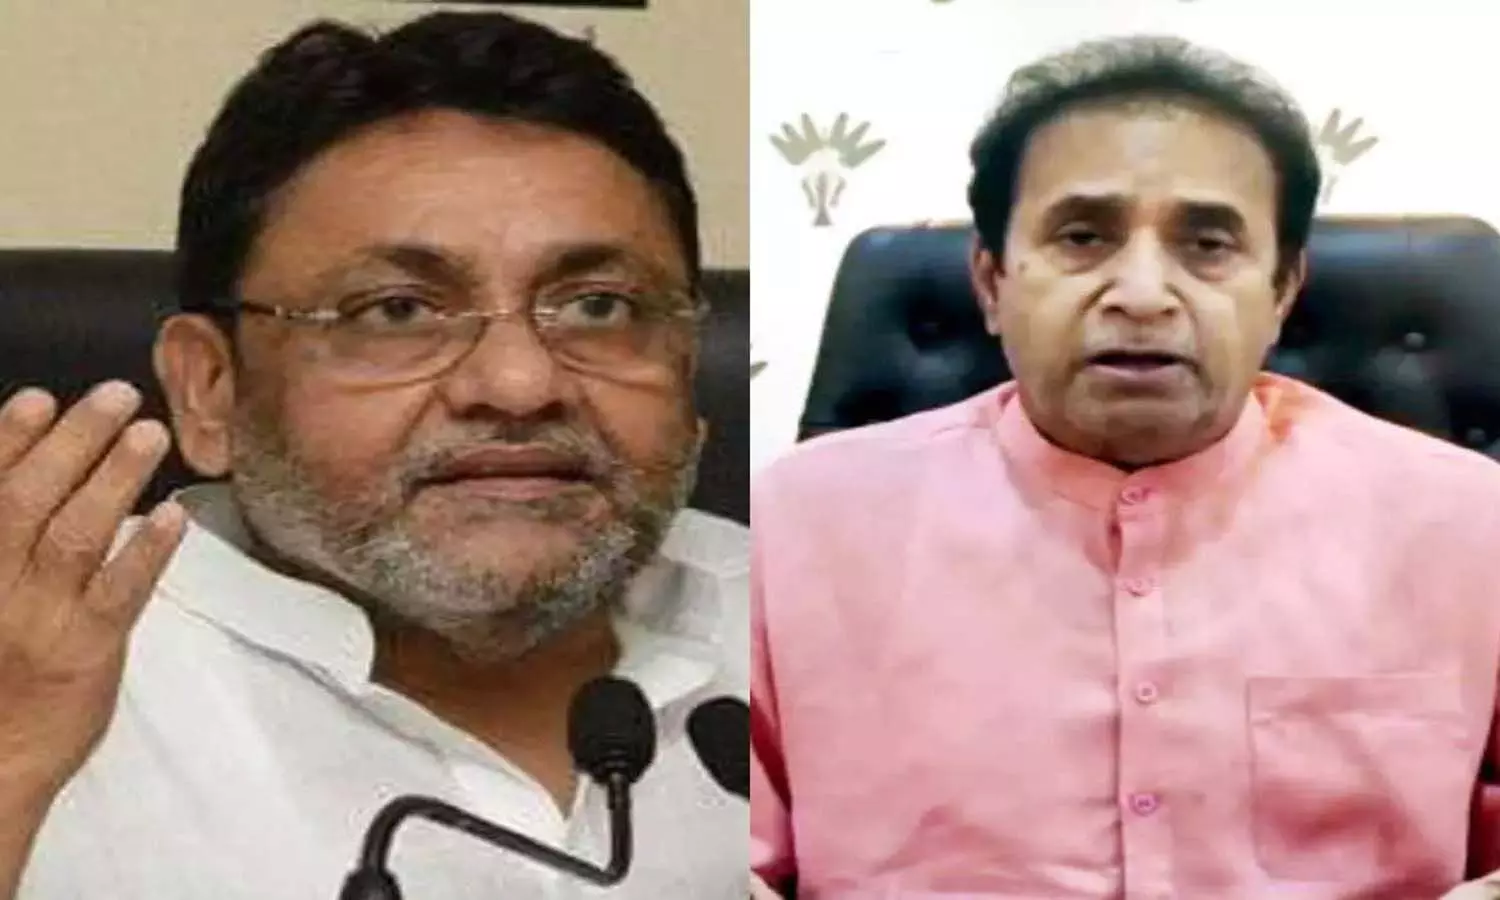 Malik and Deshmukh will not be able to vote in the Rajya Sabha elections in Maharashtra